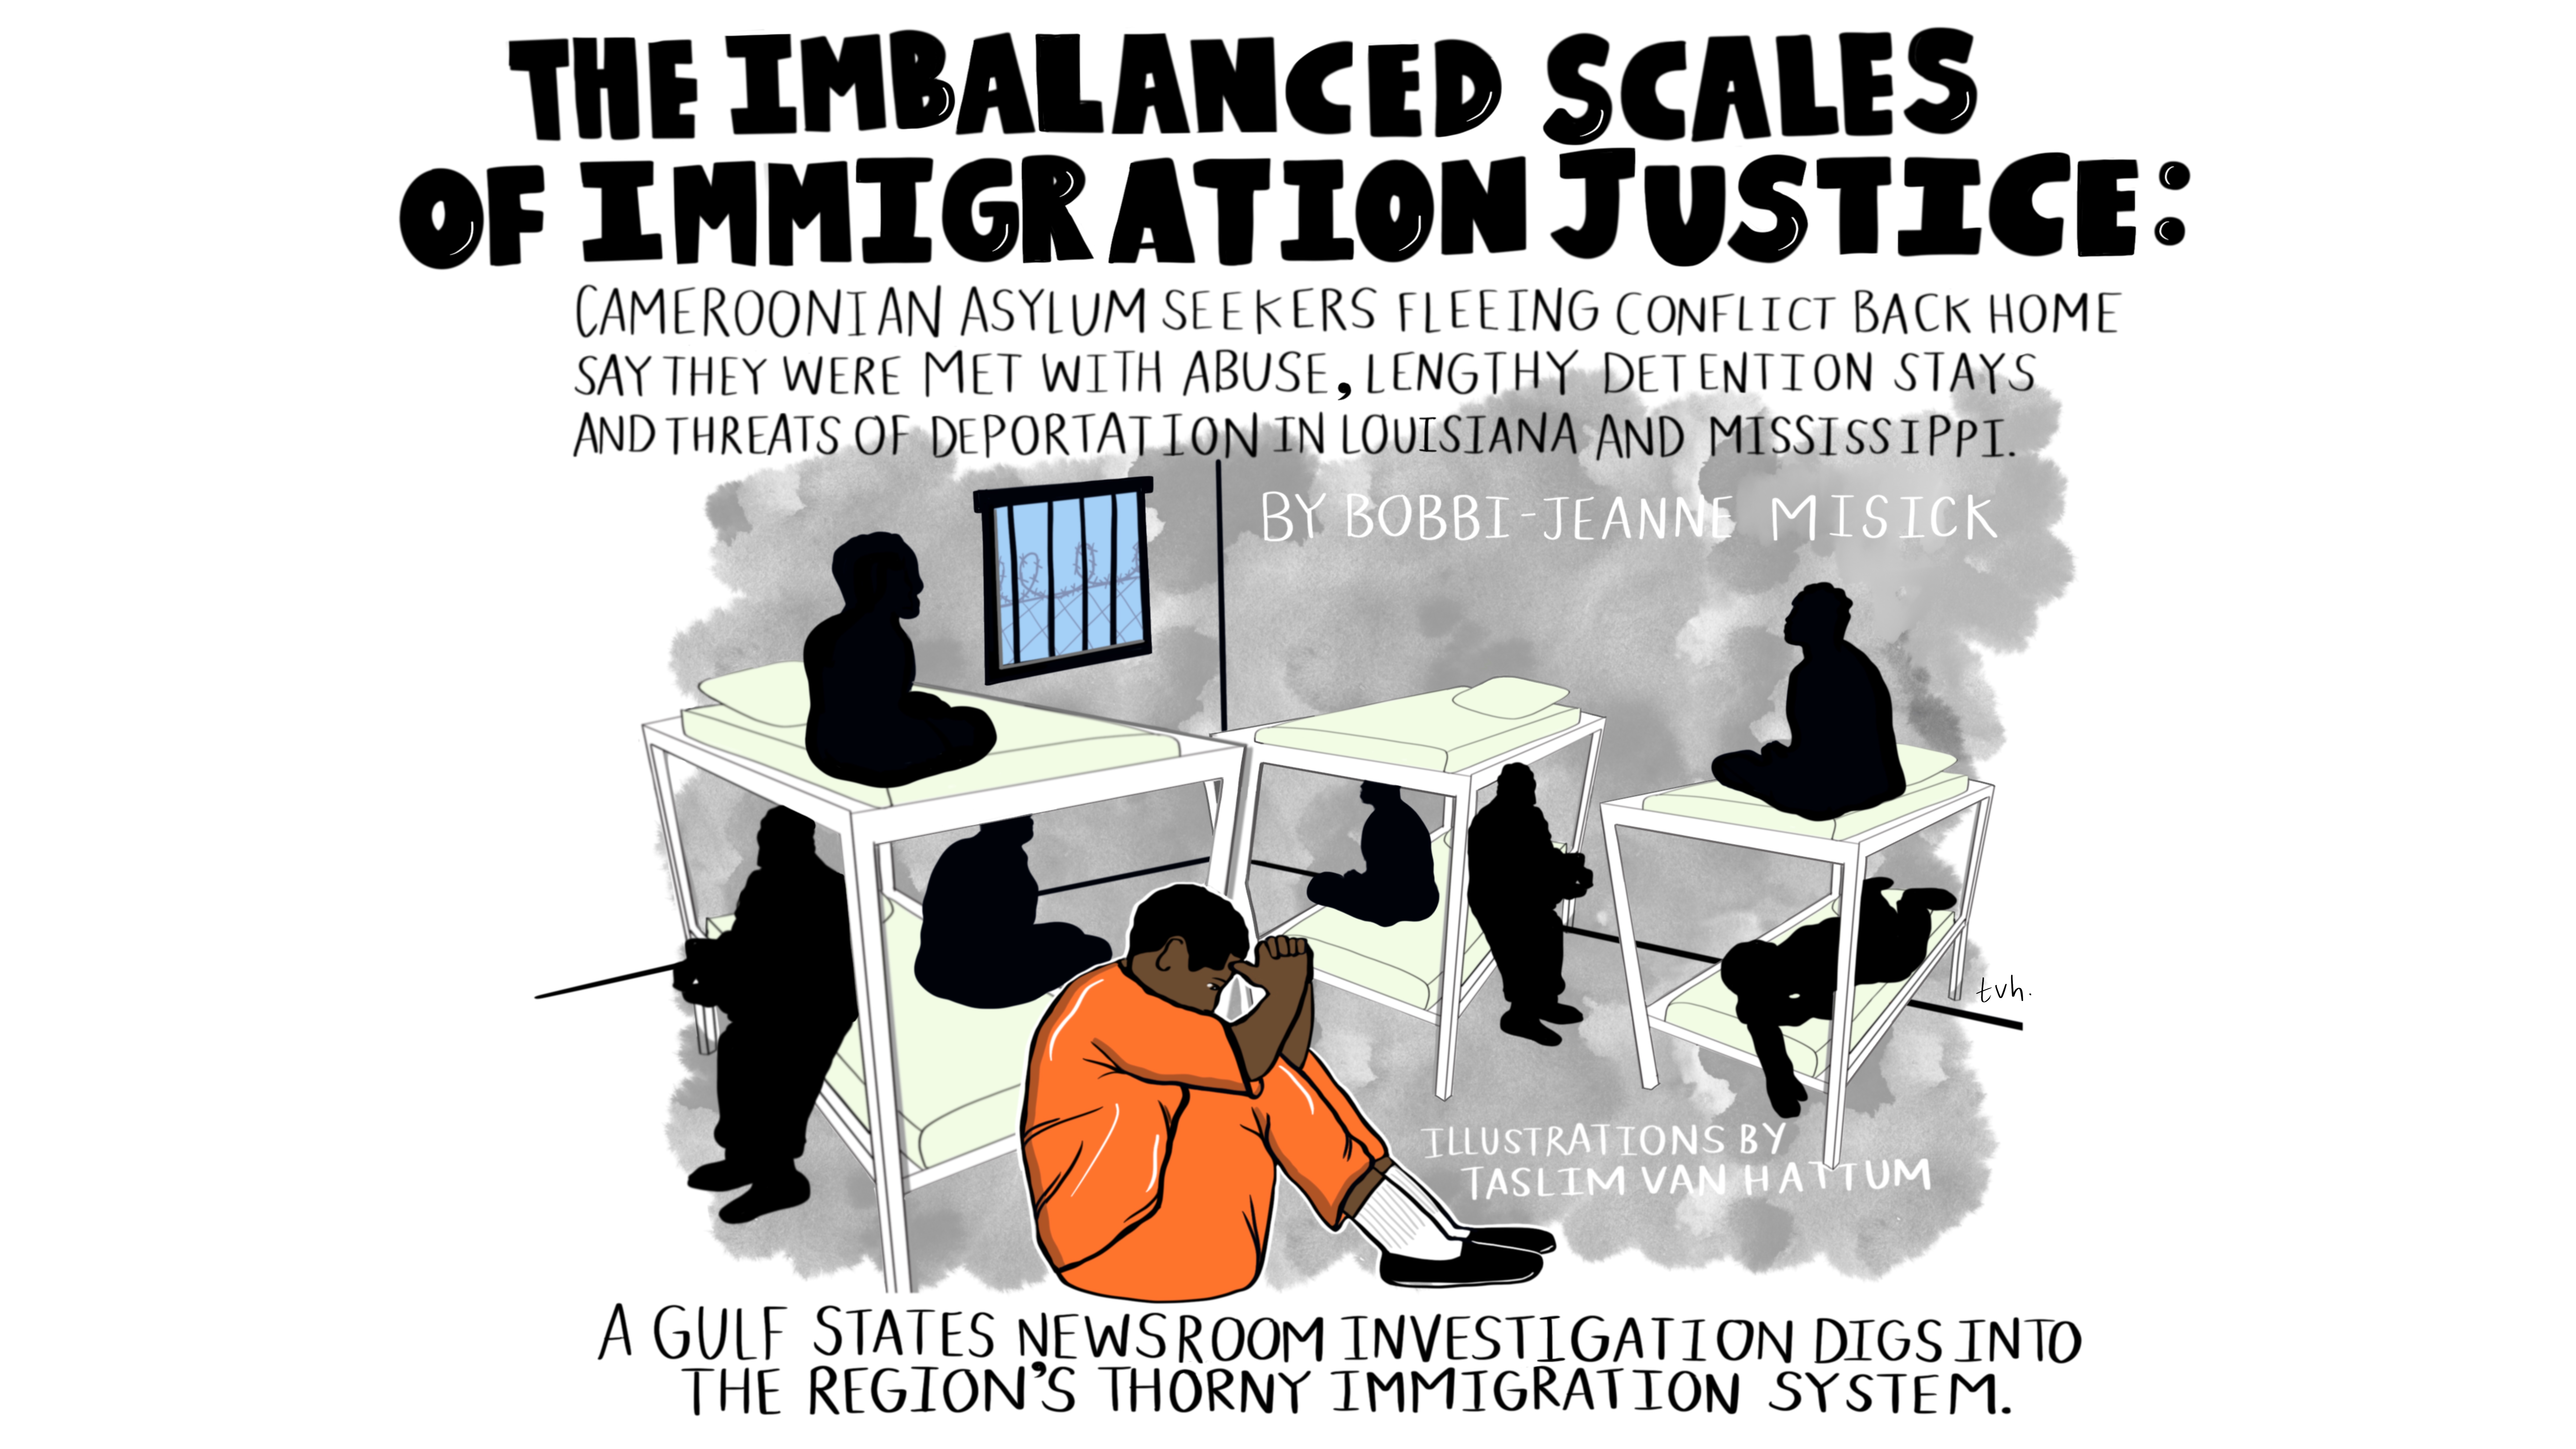 An illustration by Taslim Van Hattum depicts a Cameroonian asylum seeker sitting in a crowded detention cell. Around the image are the headline and description of Bobbi-Jeanne Misick's Type Investigation story.